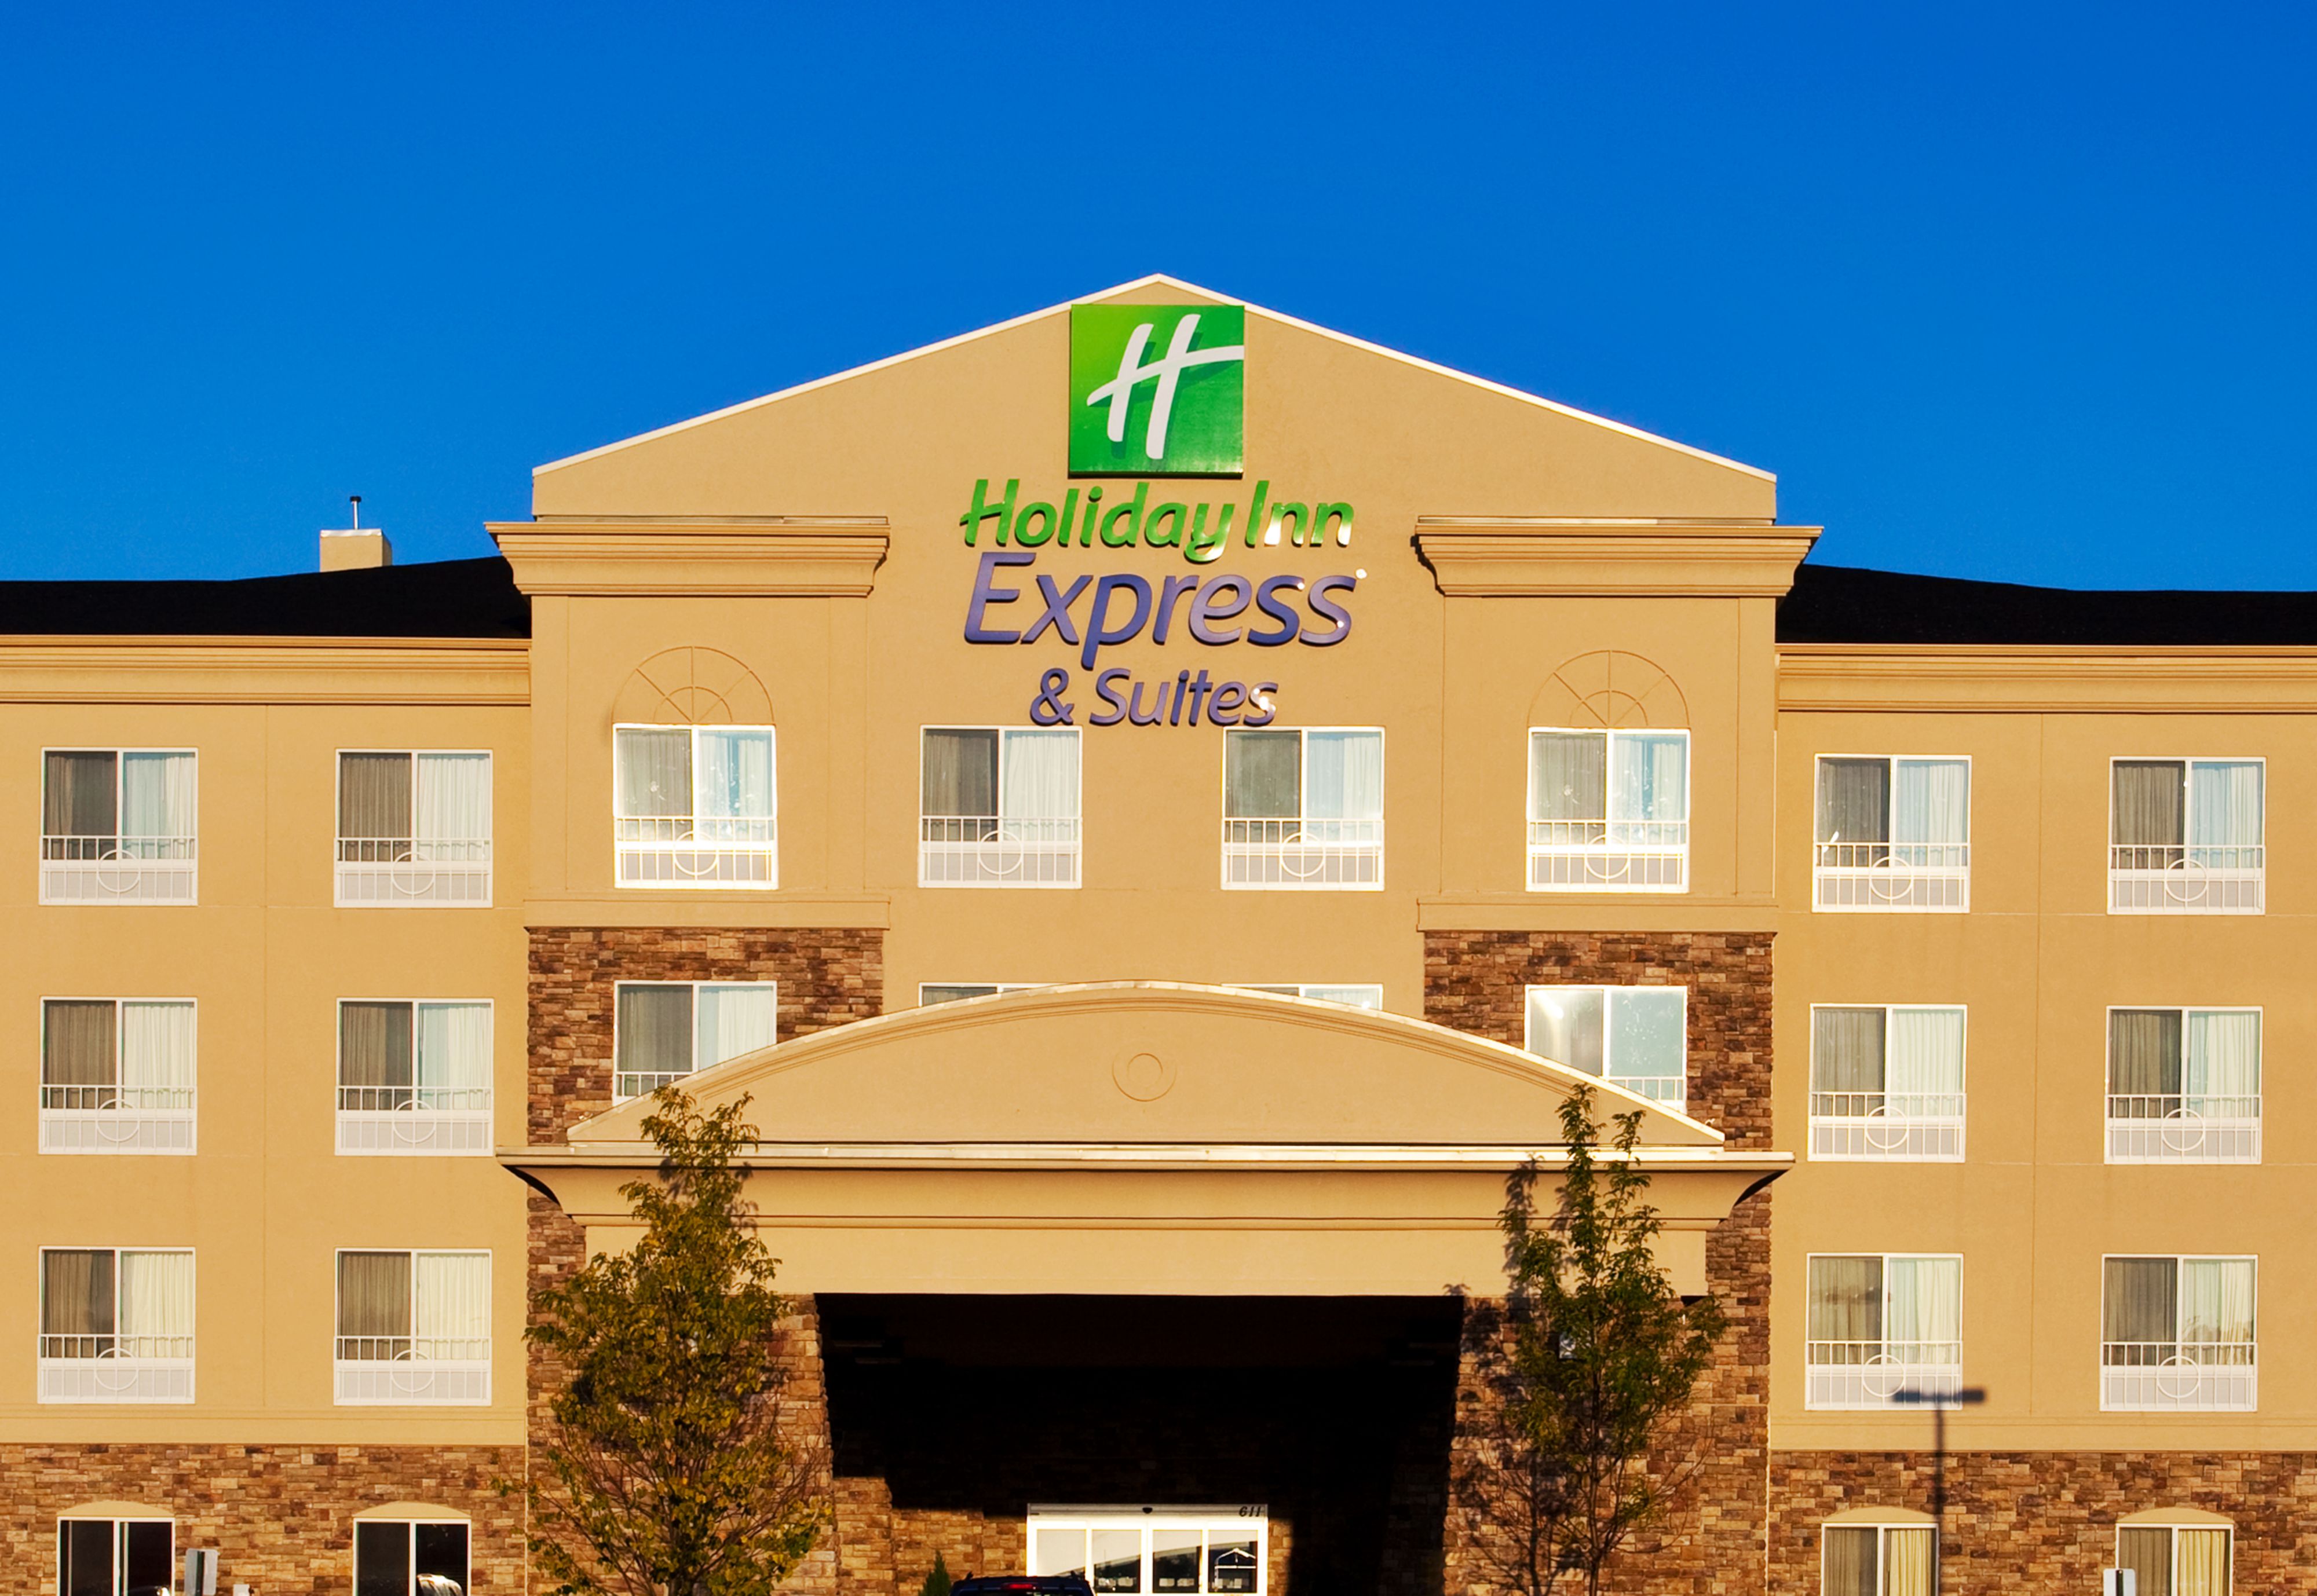 Holiday Inn Express & Suites Cheyenne Coupons Cheyenne WY near me | 8coupons